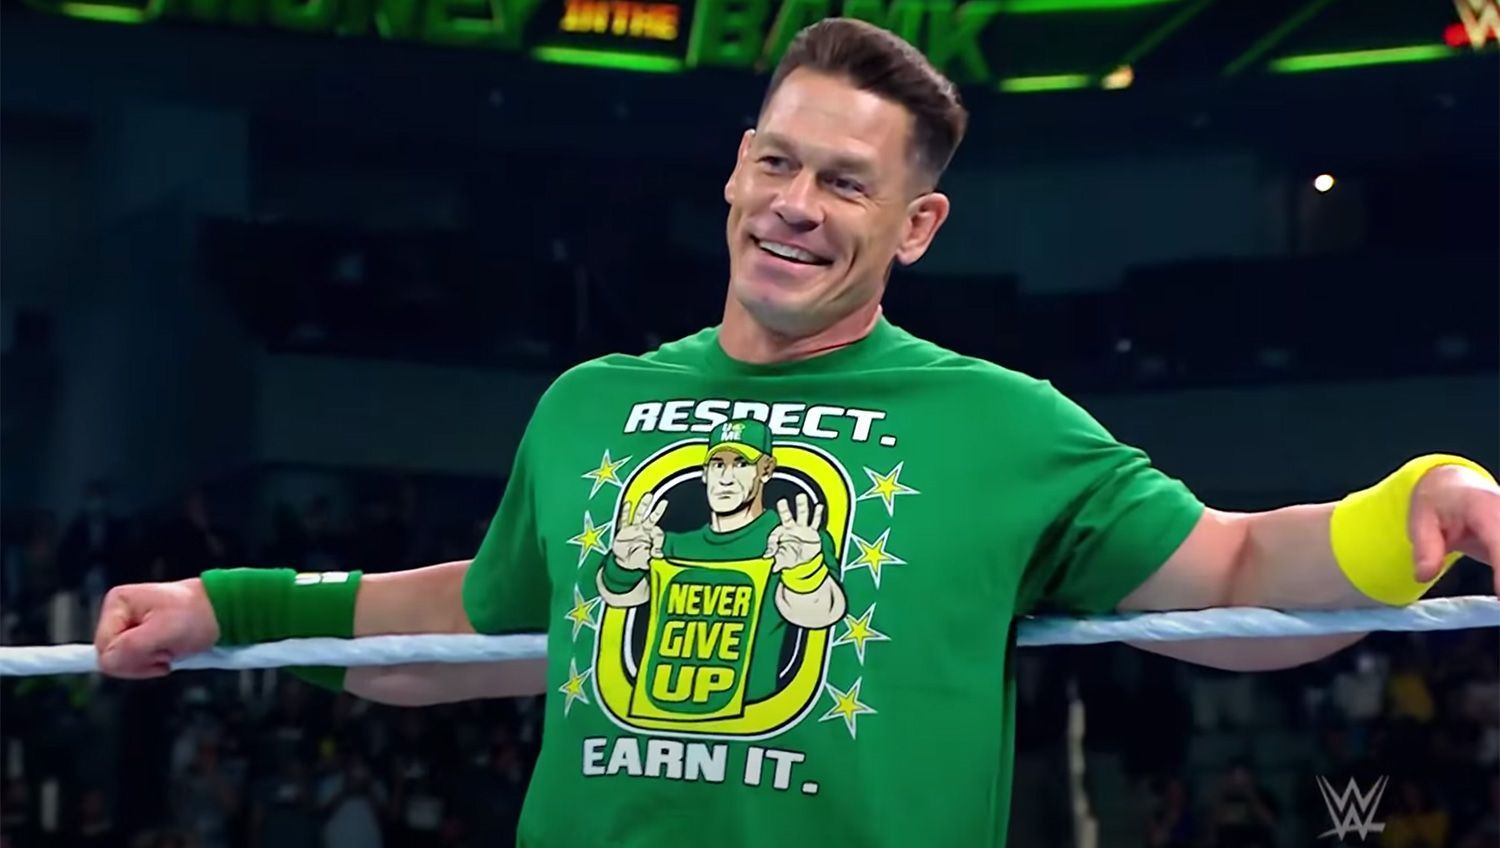 It&#039;s not for nothing Cena is called The Franchise Player